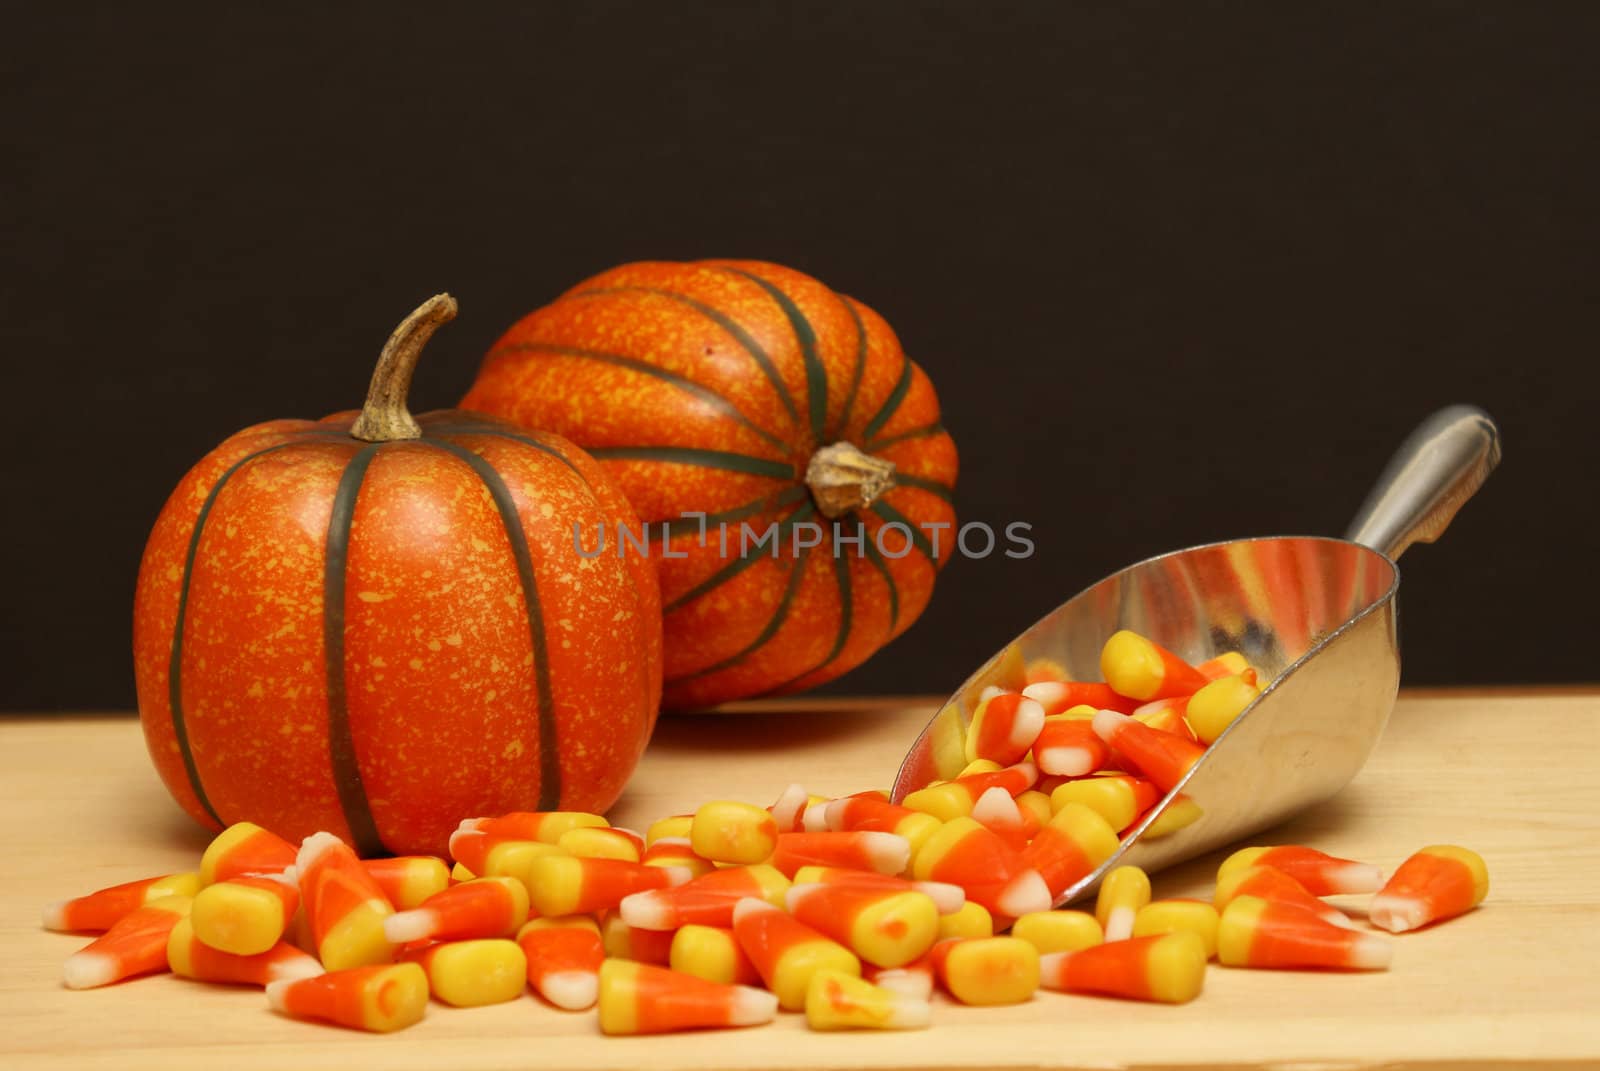 A scoop of candy corn next to pumpkins.